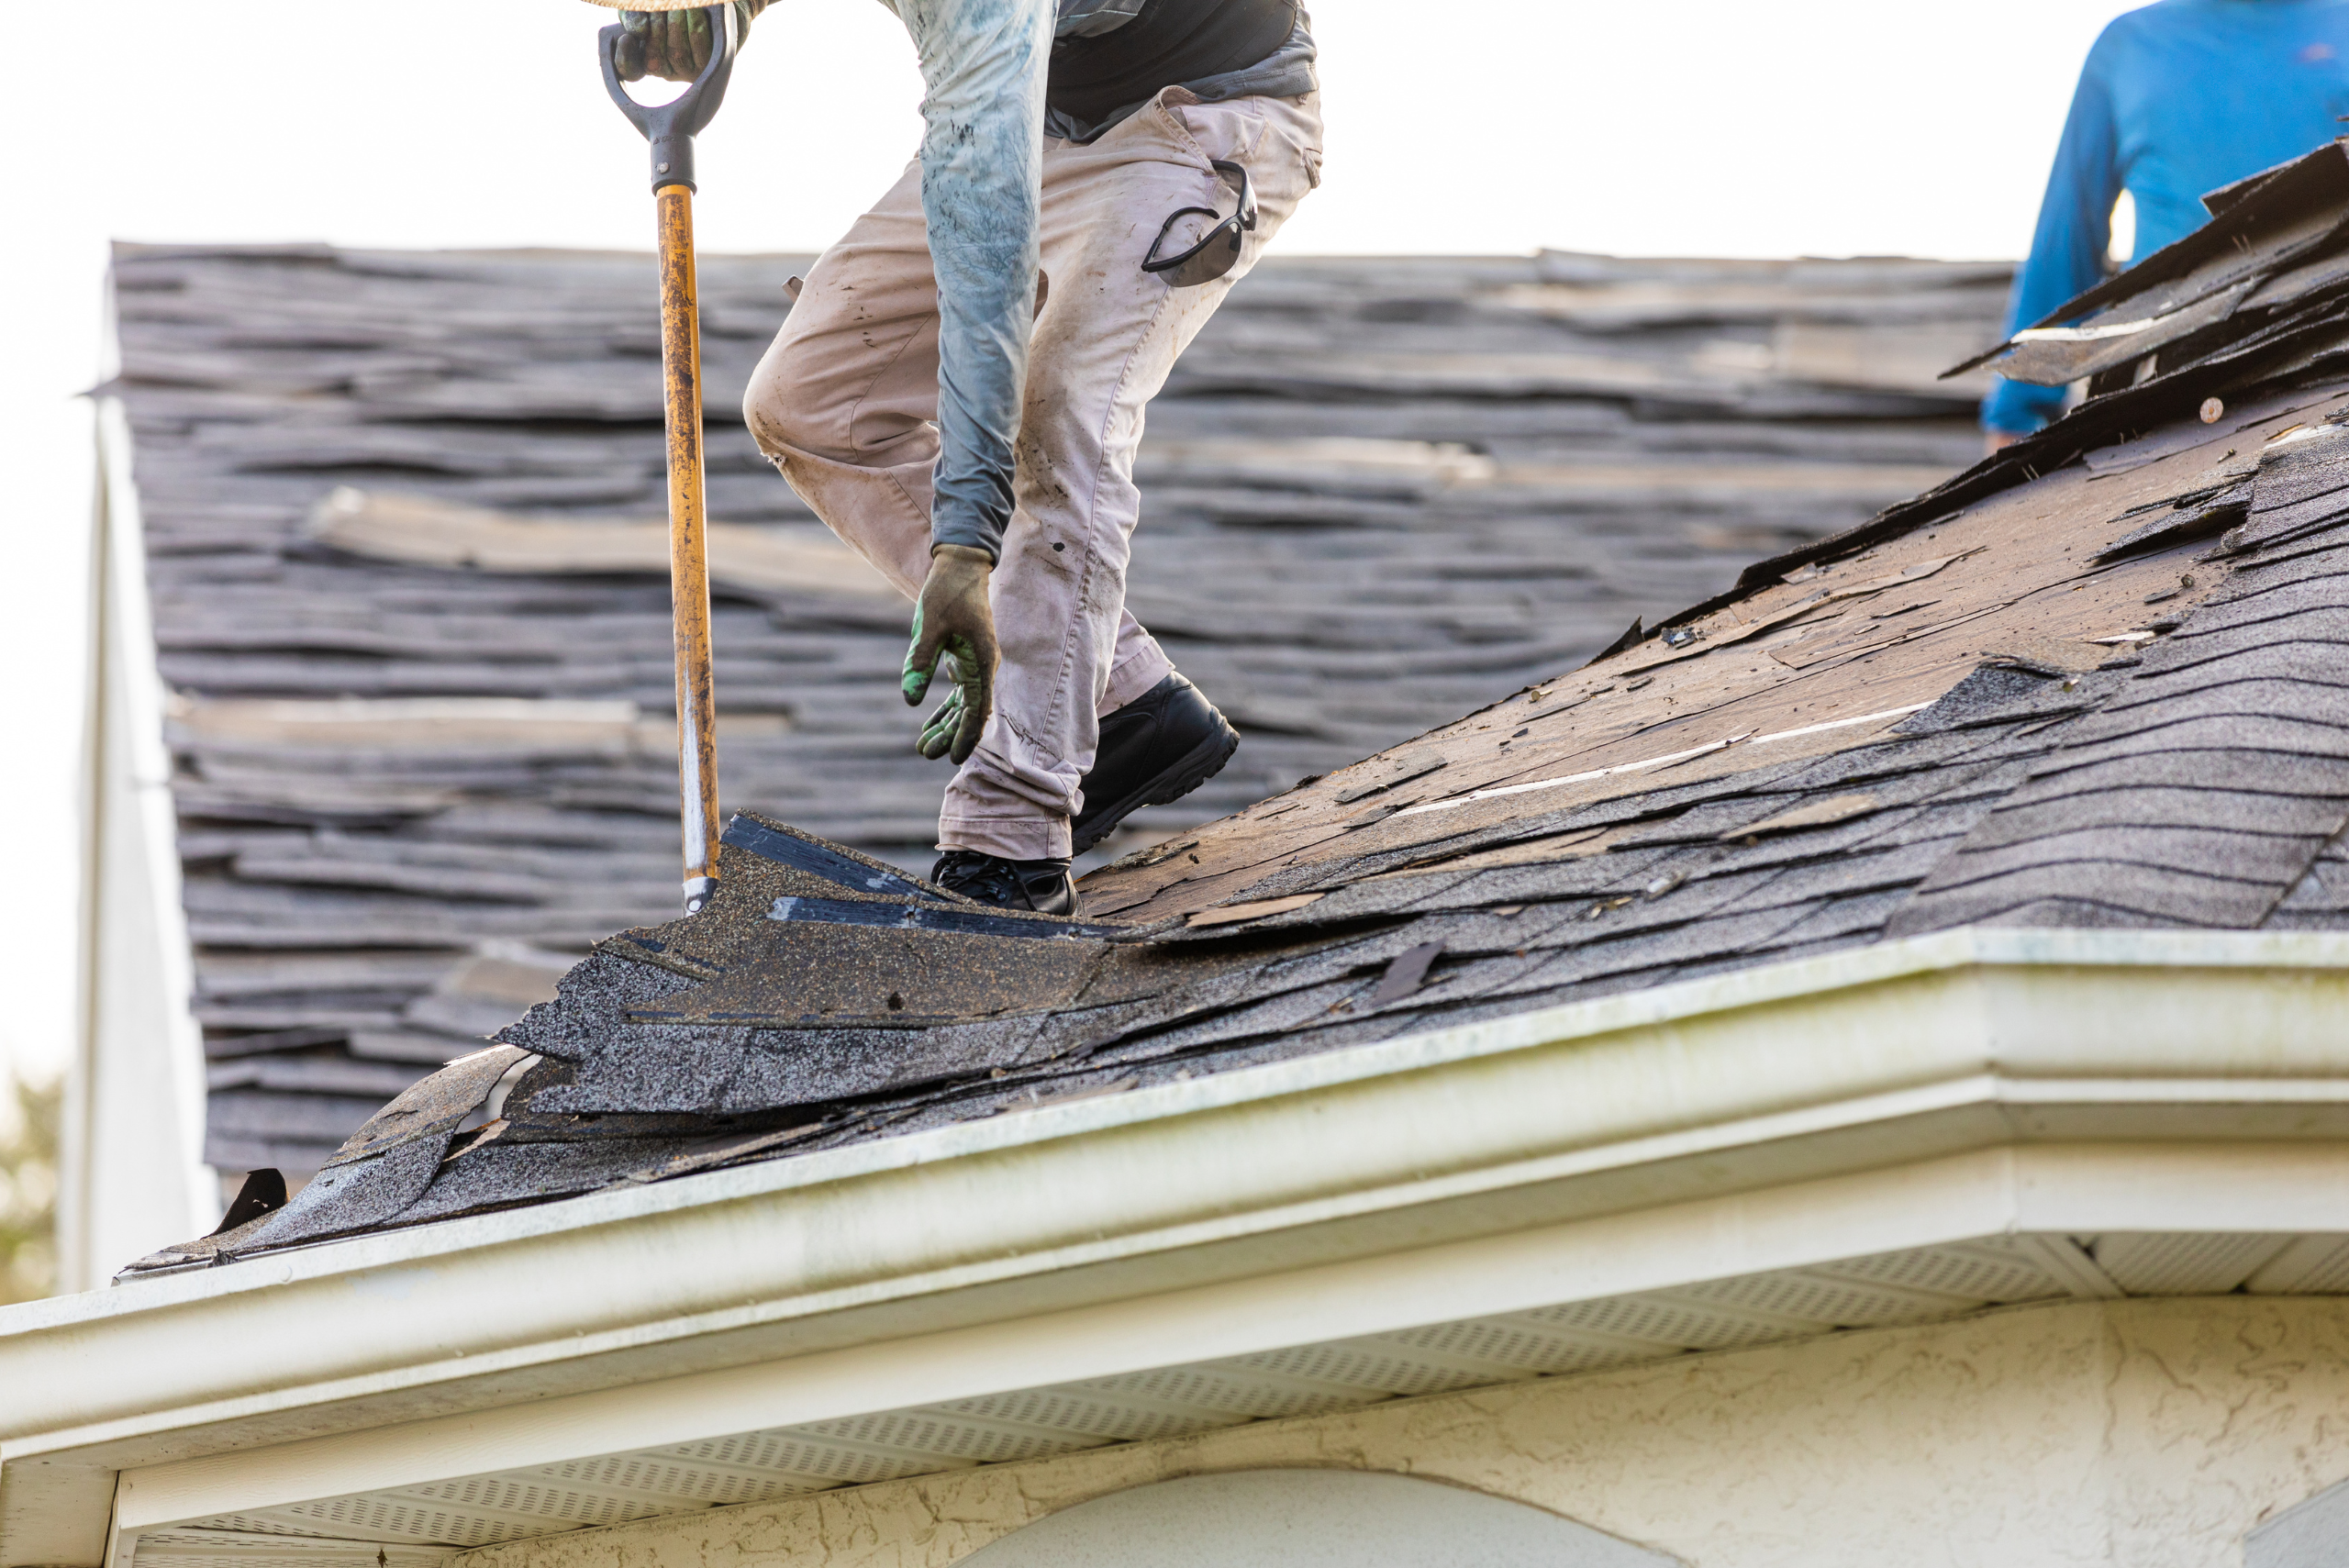 Roofer using a shovel to remove shingles.